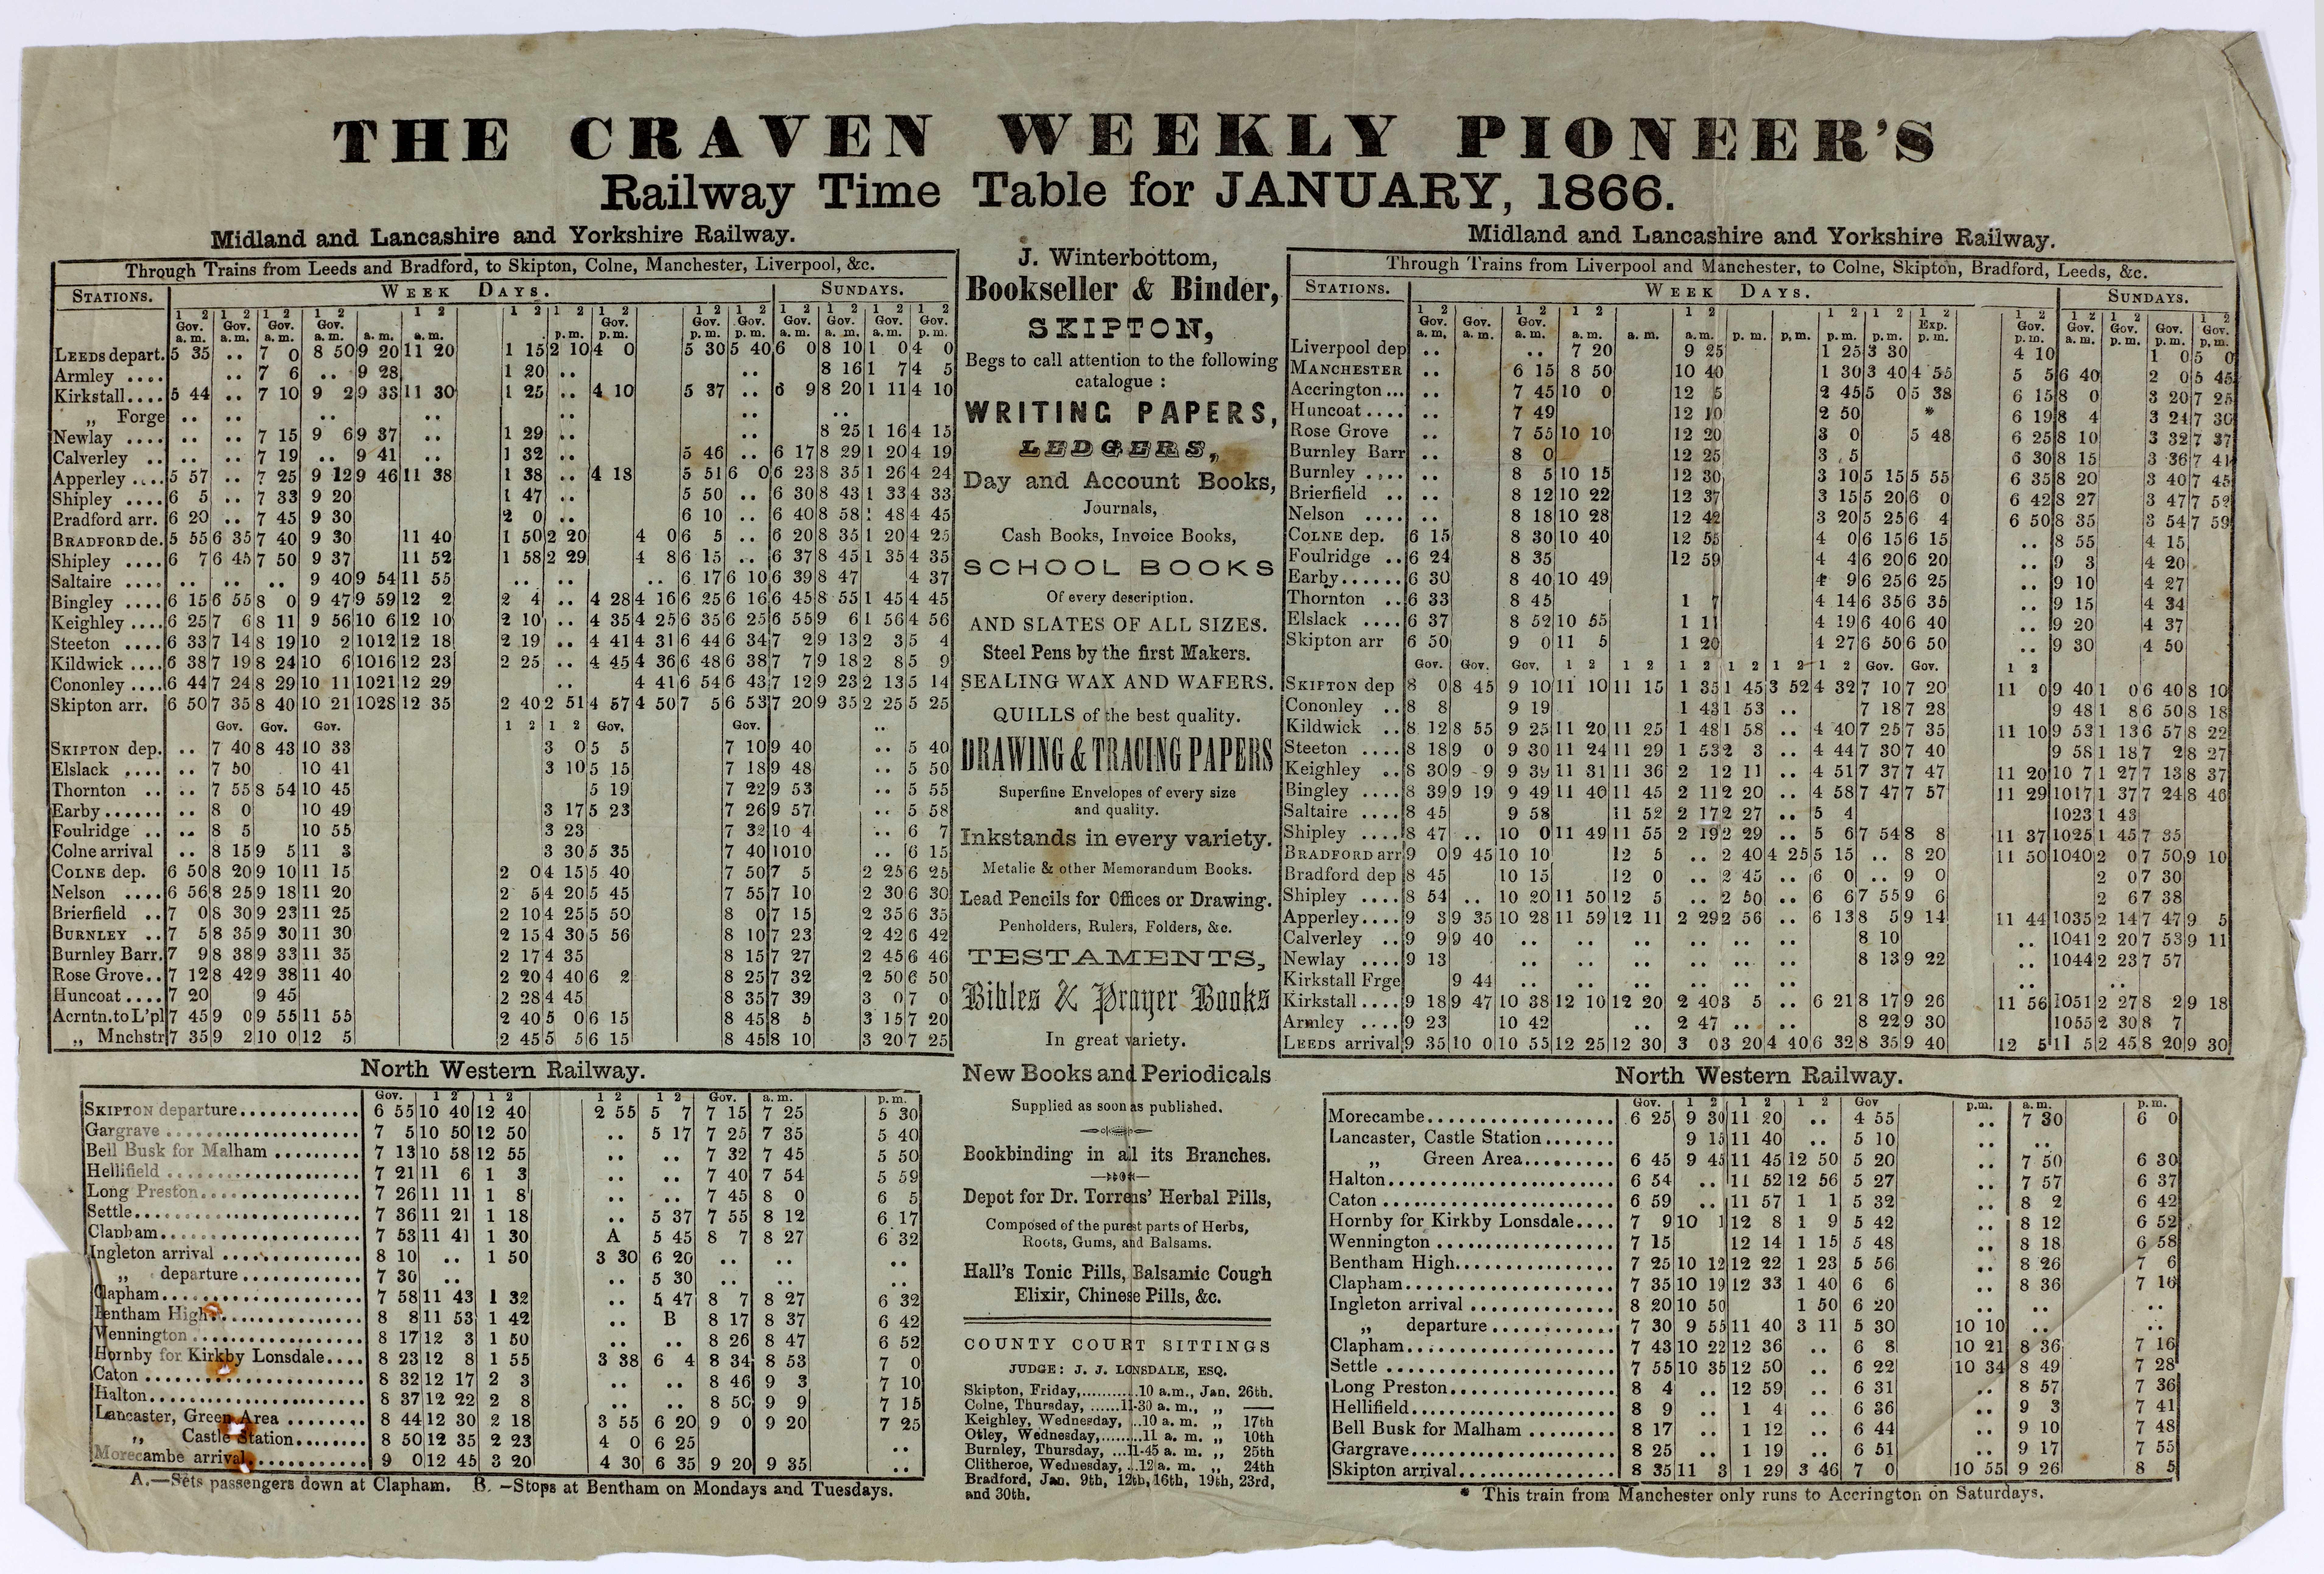 •	Railway timetable for January 1866 from the Craven Weekly Pioneer.